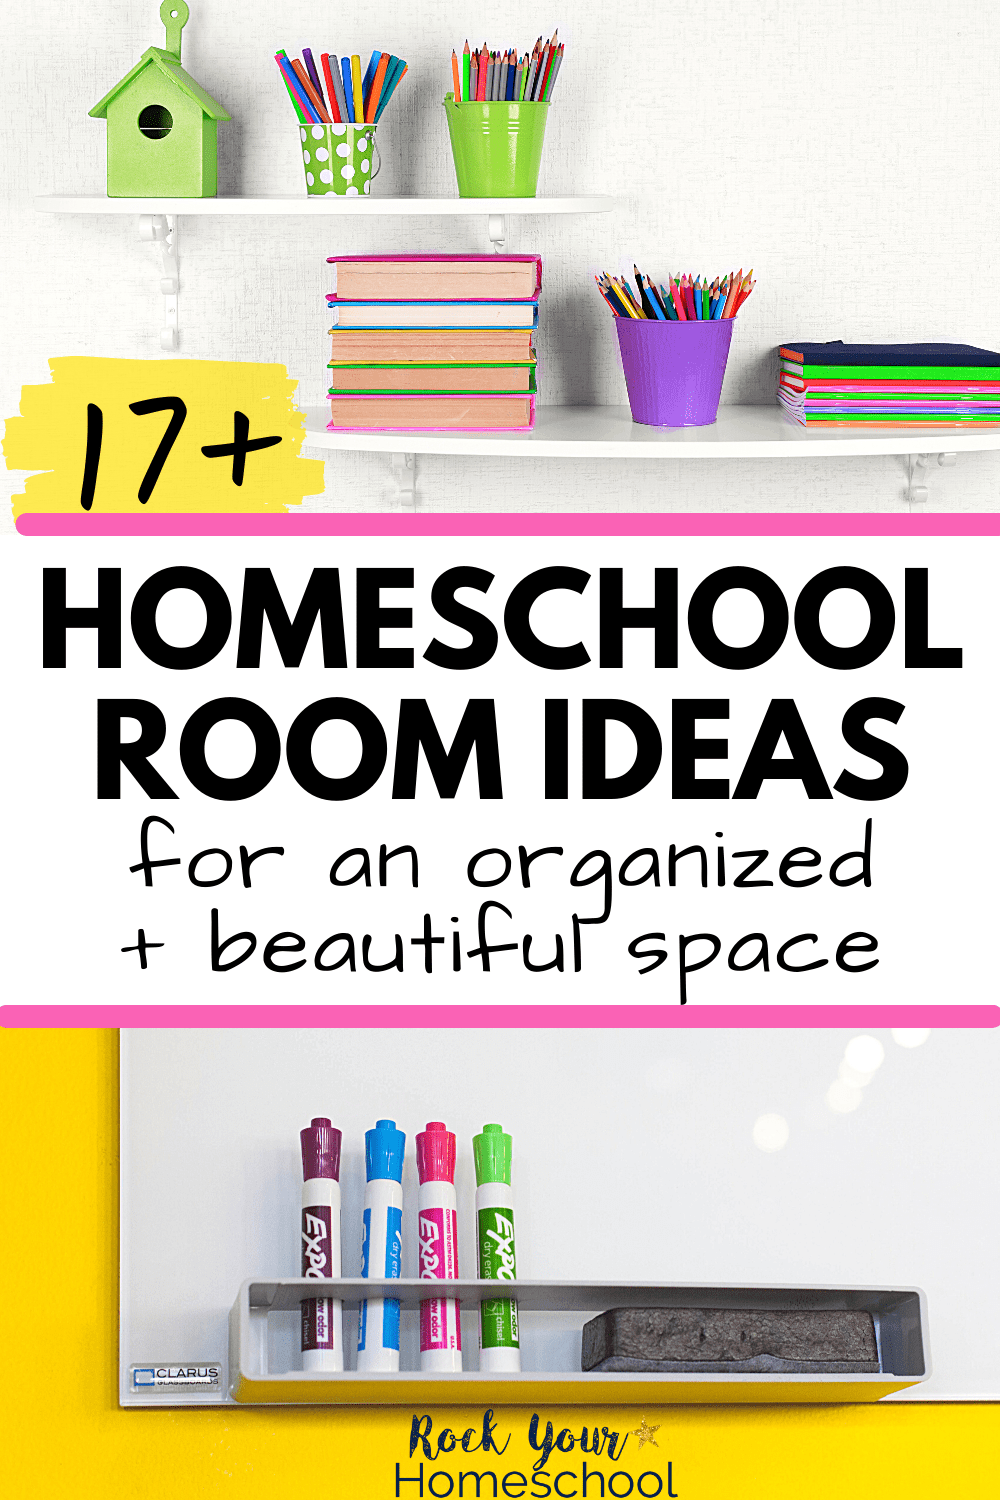 17 Outstanding Homeschool Room Ideas for An Organized, Beautiful Space